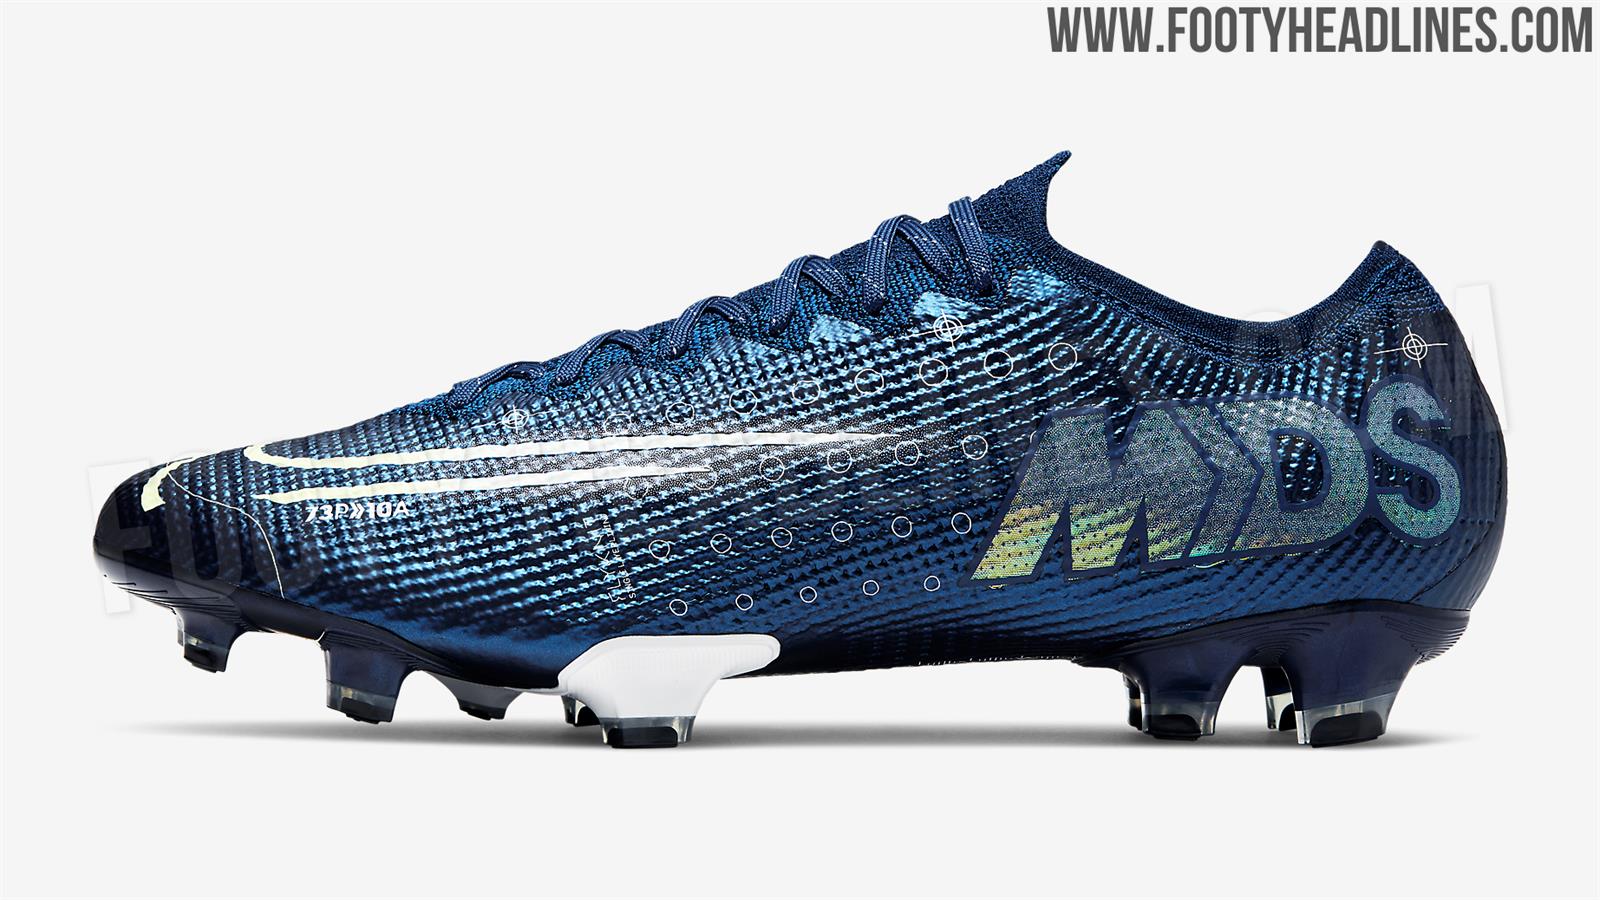 Nike Mercurial 'Dream Speed' 2019-20 Boots Released - & Mbappe Boots - Footy Headlines